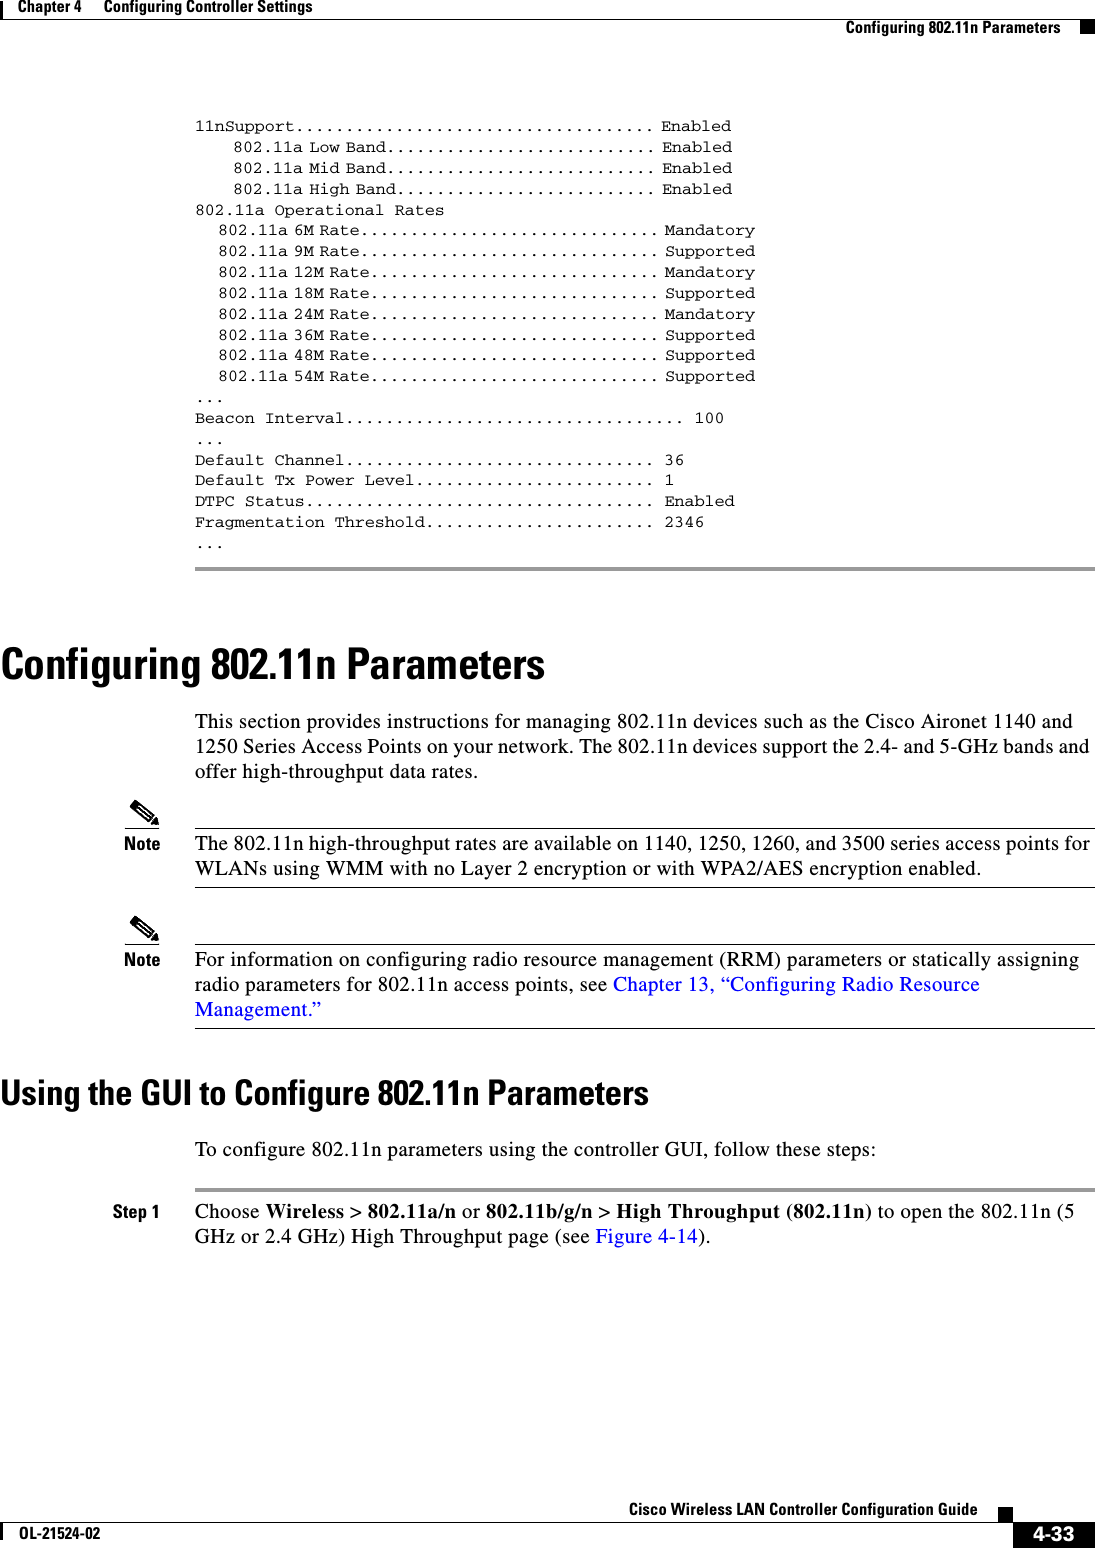  4-33Cisco Wireless LAN Controller Configuration GuideOL-21524-02Chapter 4      Configuring Controller SettingsConfiguring 802.11n Parameters11nSupport.................................... Enabled                                                               802.11a Low Band........................... Enabled                                                               802.11a Mid Band........................... Enabled                                                               802.11a High Band.......................... Enabled                                                         802.11a Operational Rates                             802.11a 6M Rate.............................. Mandatory                                                               802.11a 9M Rate.............................. Supported                                                               802.11a 12M Rate............................. Mandatory                                                               802.11a 18M Rate............................. Supported                                                               802.11a 24M Rate............................. Mandatory                                                               802.11a 36M Rate............................. Supported                                                               802.11a 48M Rate............................. Supported                                                               802.11a 54M Rate............................. Supported                                                           ...Beacon Interval.................................. 100... Default Channel............................... 36Default Tx Power Level........................ 1DTPC Status................................... EnabledFragmentation Threshold....................... 2346...Configuring 802.11n ParametersThis section provides instructions for managing 802.11n devices such as the Cisco Aironet 1140 and 1250 Series Access Points on your network. The 802.11n devices support the 2.4- and 5-GHz bands and offer high-throughput data rates.Note The 802.11n high-throughput rates are available on 1140, 1250, 1260, and 3500 series access points for WLANs using WMM with no Layer 2 encryption or with WPA2/AES encryption enabled.Note For information on configuring radio resource management (RRM) parameters or statically assigning radio parameters for 802.11n access points, see Chapter 13, “Configuring Radio Resource Management.”Using the GUI to Configure 802.11n ParametersTo configure 802.11n parameters using the controller GUI, follow these steps:Step 1 Choose Wireless &gt; 802.11a/n or 802.11b/g/n &gt; High Throughput (802.11n) to open the 802.11n (5 GHz or 2.4 GHz) High Throughput page (see Figure 4-14).